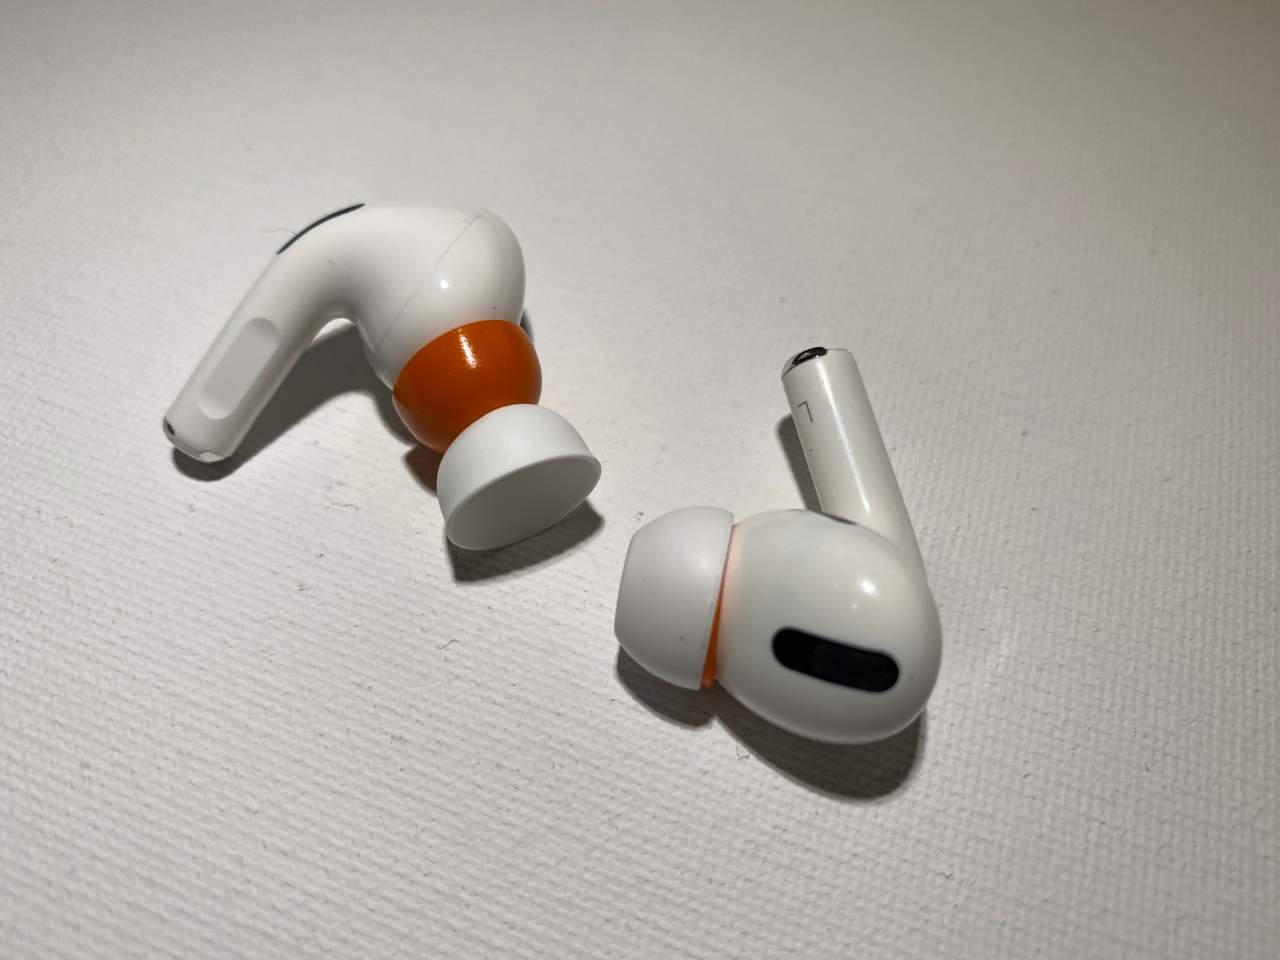 AirPod Pros Keep Falling Out? Here's What You Can Do